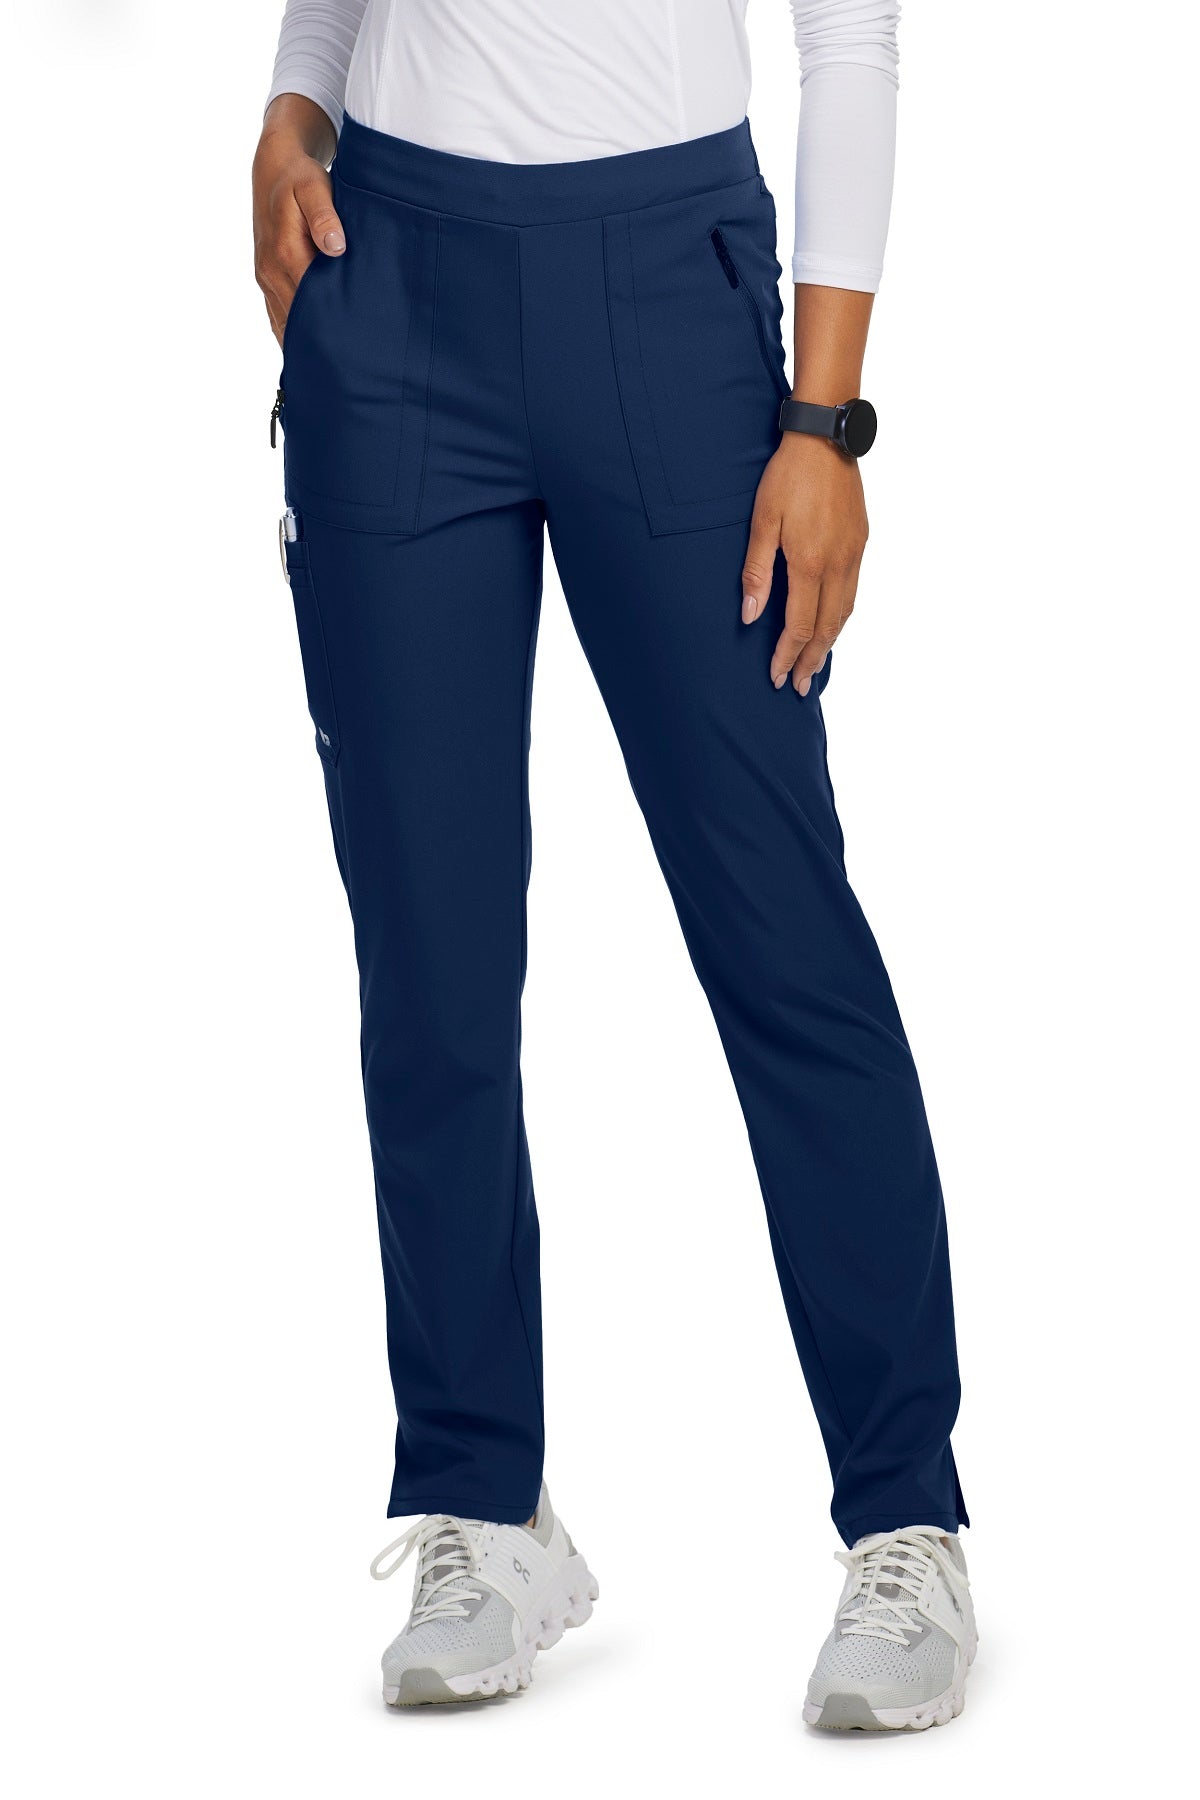 Barco Unify Scrub Pants Purpose 5 Pocket in Indigo at Parker's Clothing and Shoes.